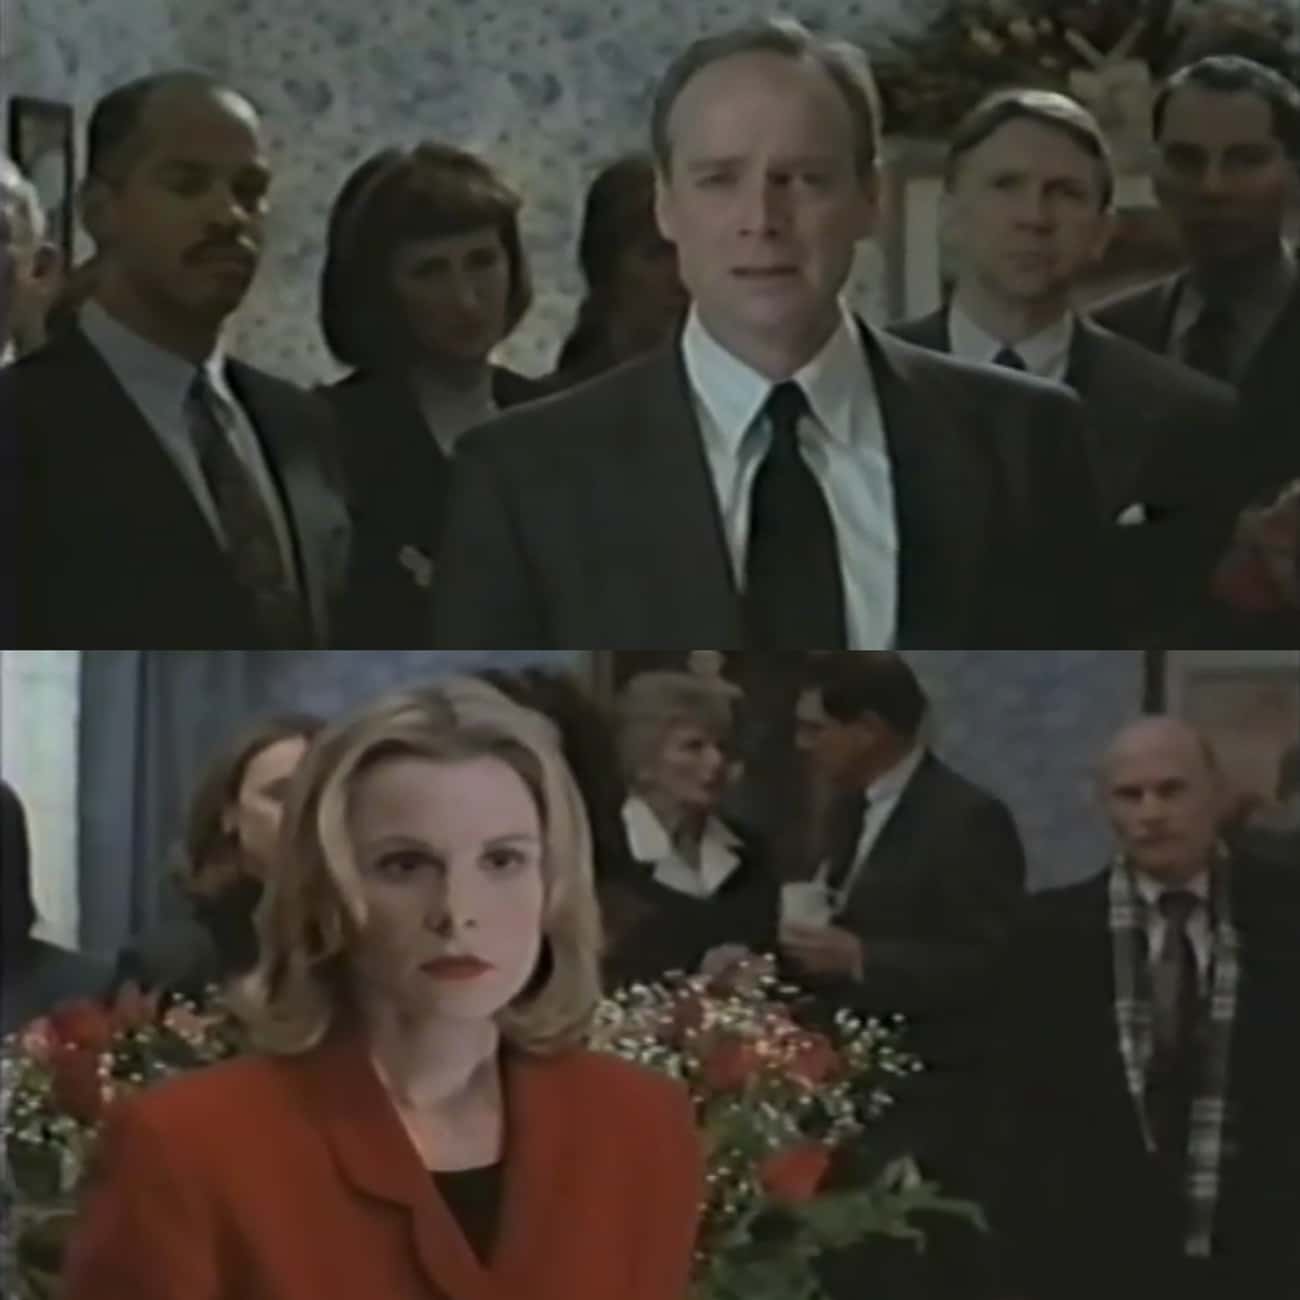 The Woman In Red In 'The Sixth Sense'